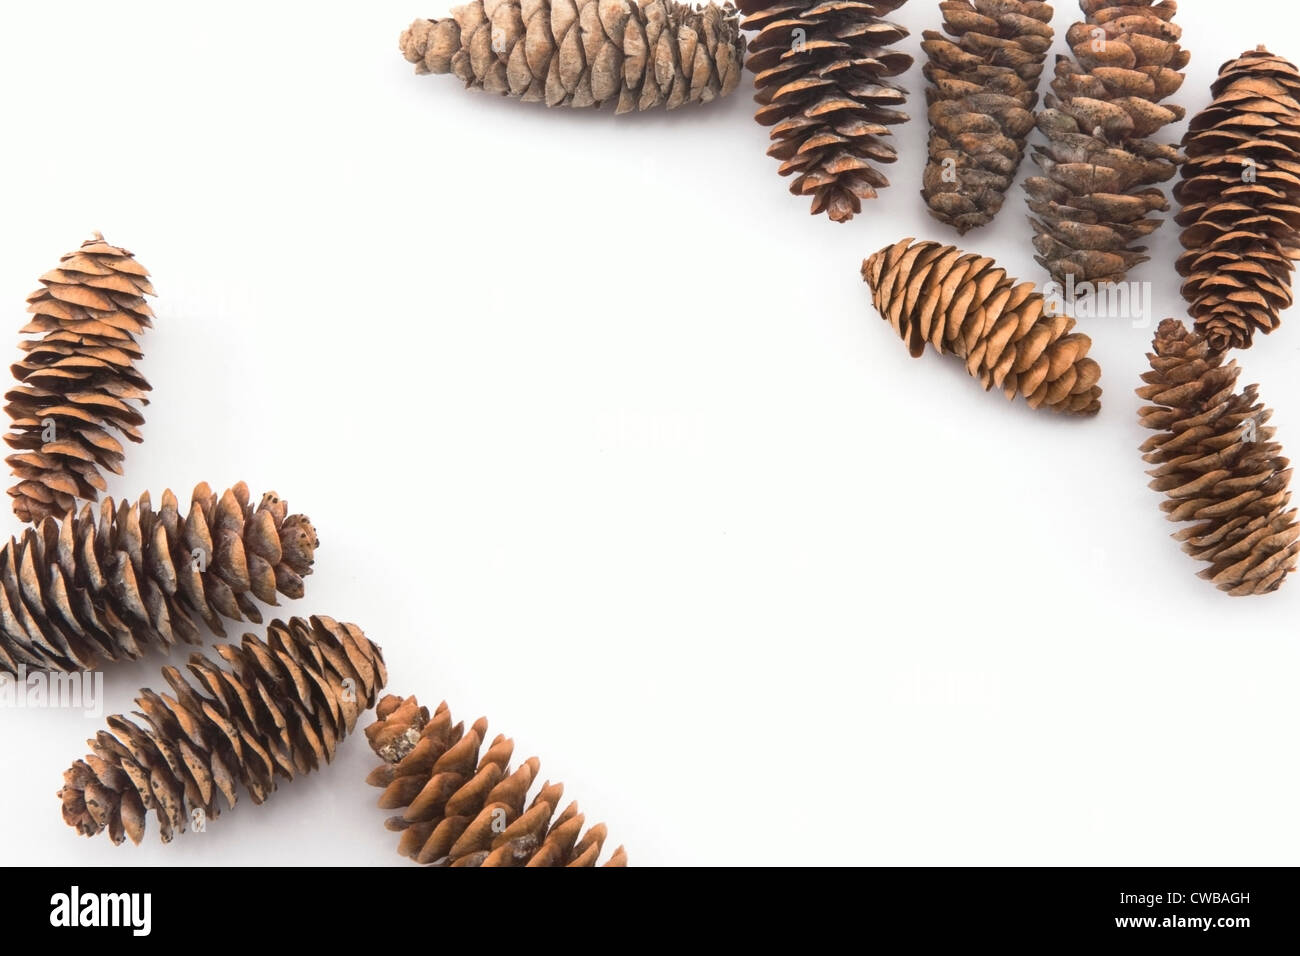 A border of Pine cones on white background. Stock Photo